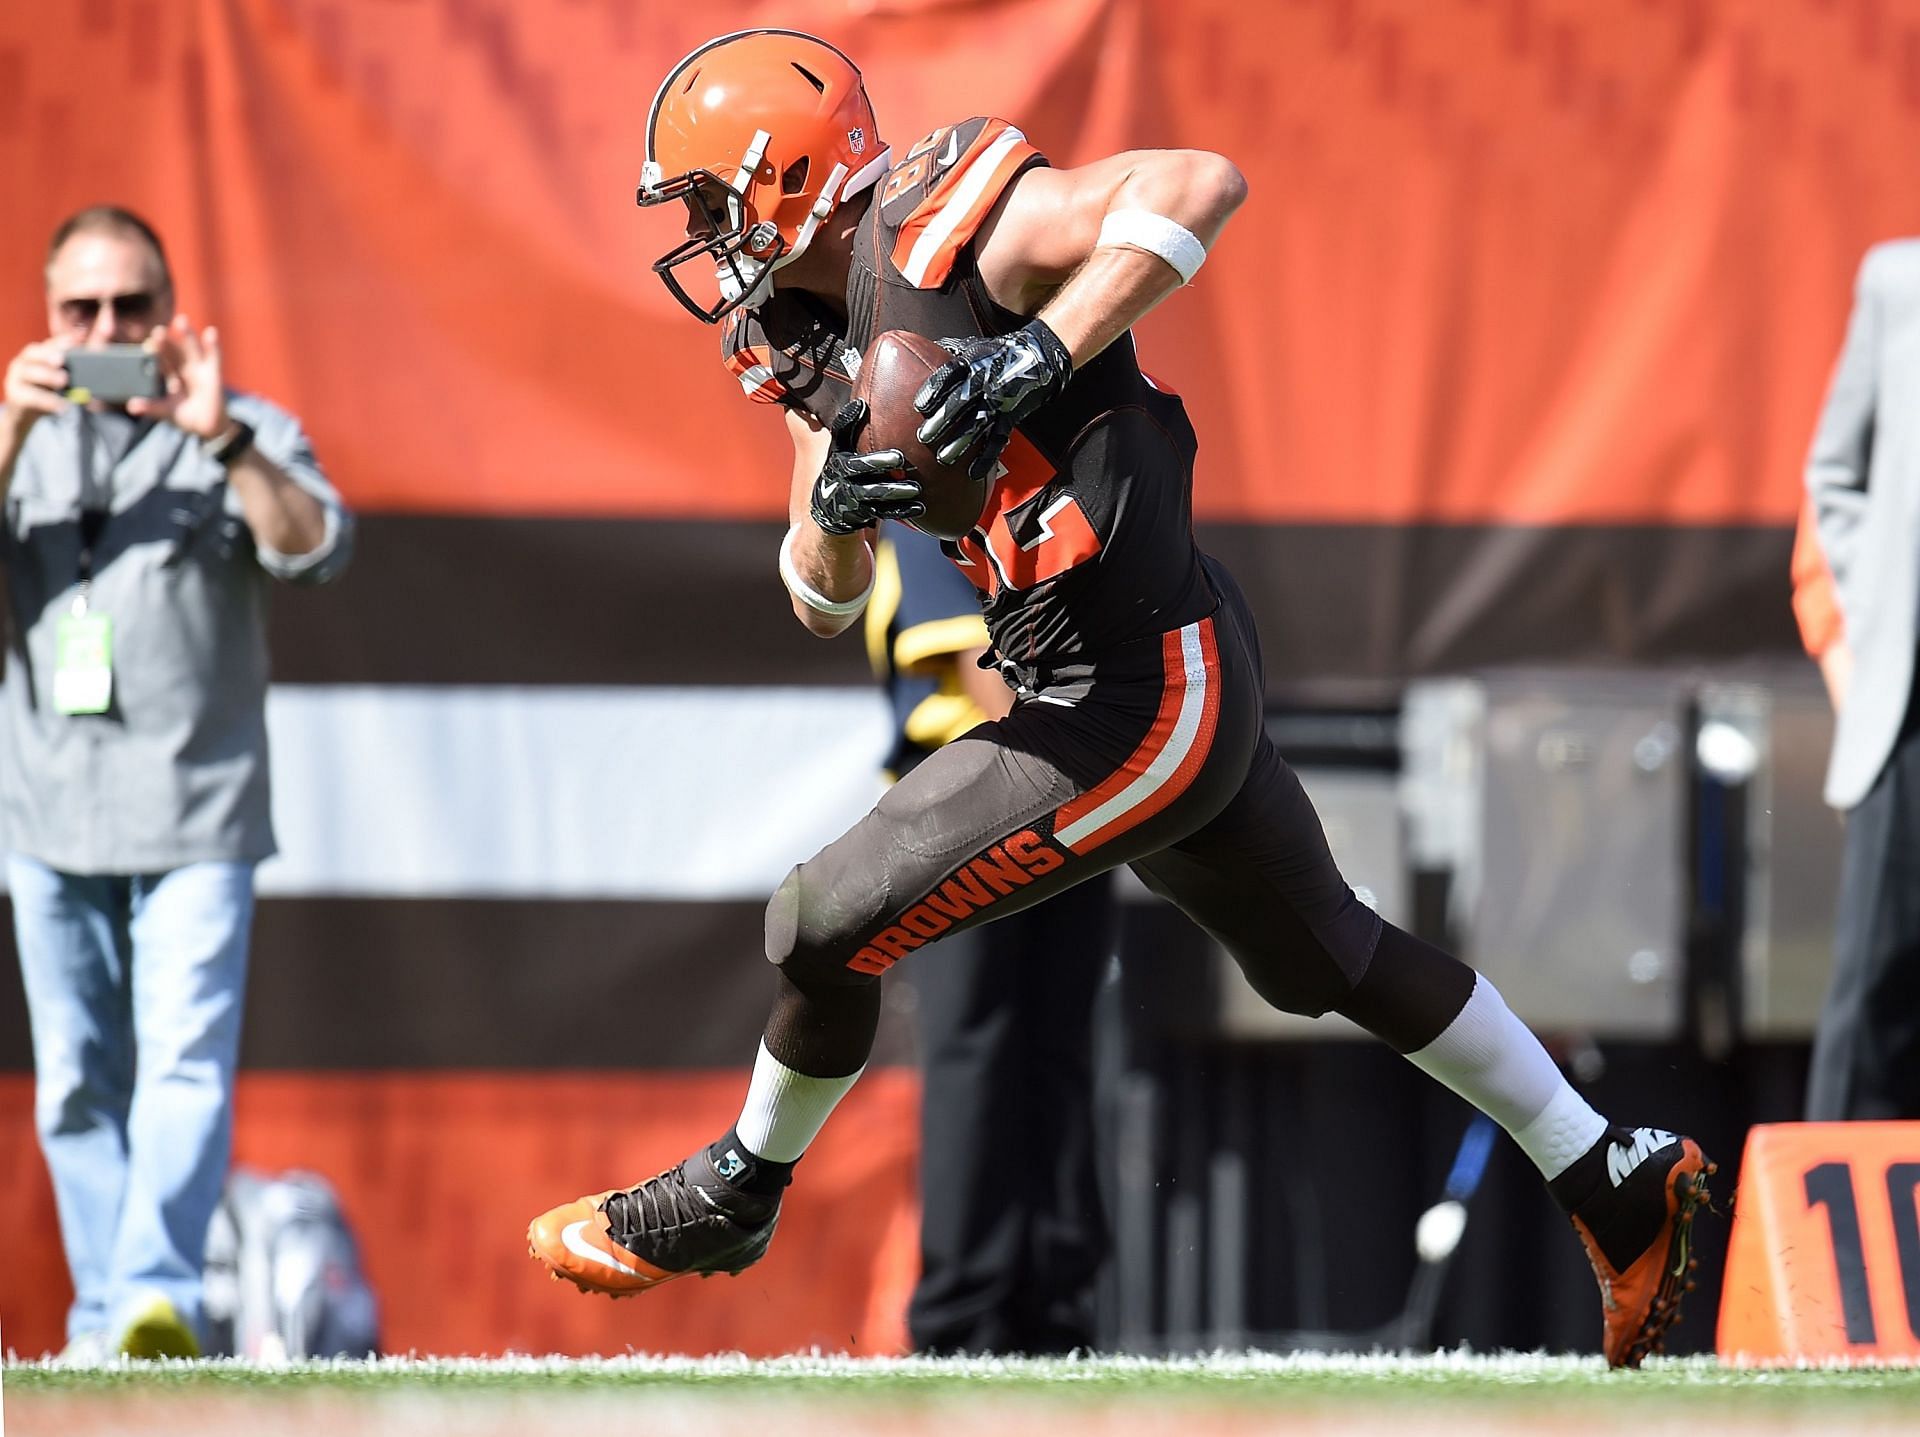 Cleveland Browns tight end Gary Barnidge